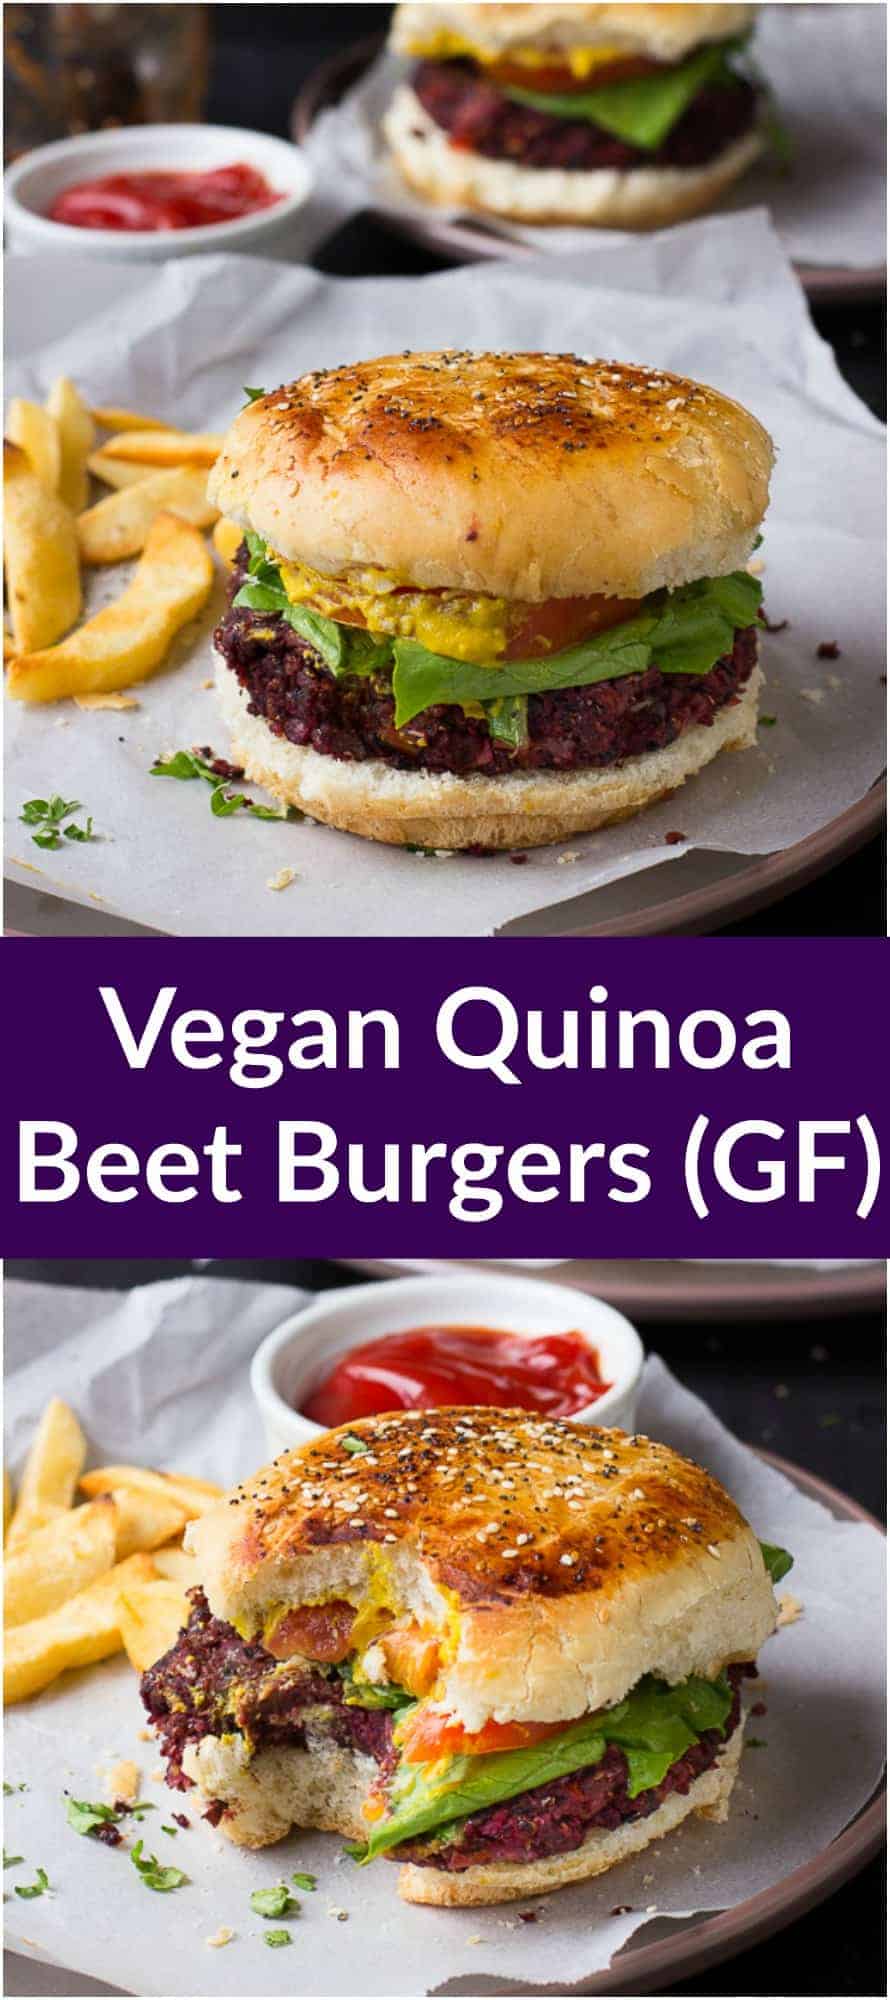 These Vegan Quinoa Beet Burgers are THE best veggie burgers I've ever made! Inspired by my favorite restaurant veggie burger, you'll be sinking your teeth into a flavorful, smoky and mouthwatering veggie burger!